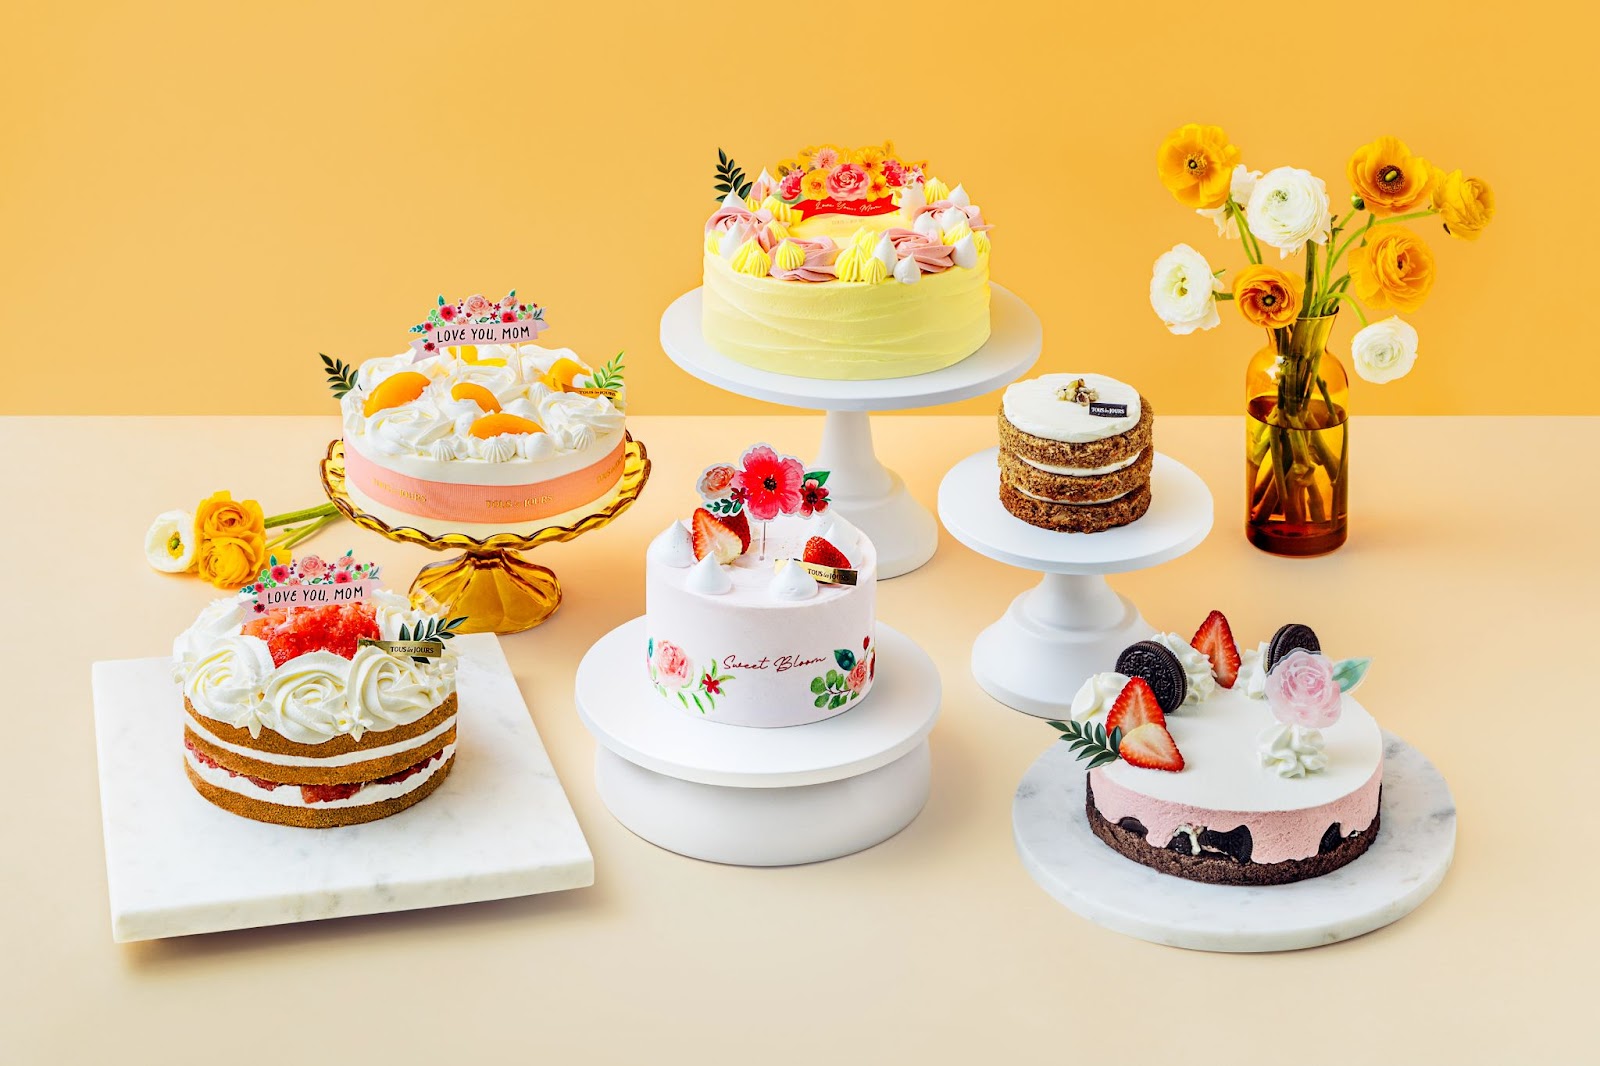 An image of the Love You Mom’ cake collection from TOUS les JOURS.